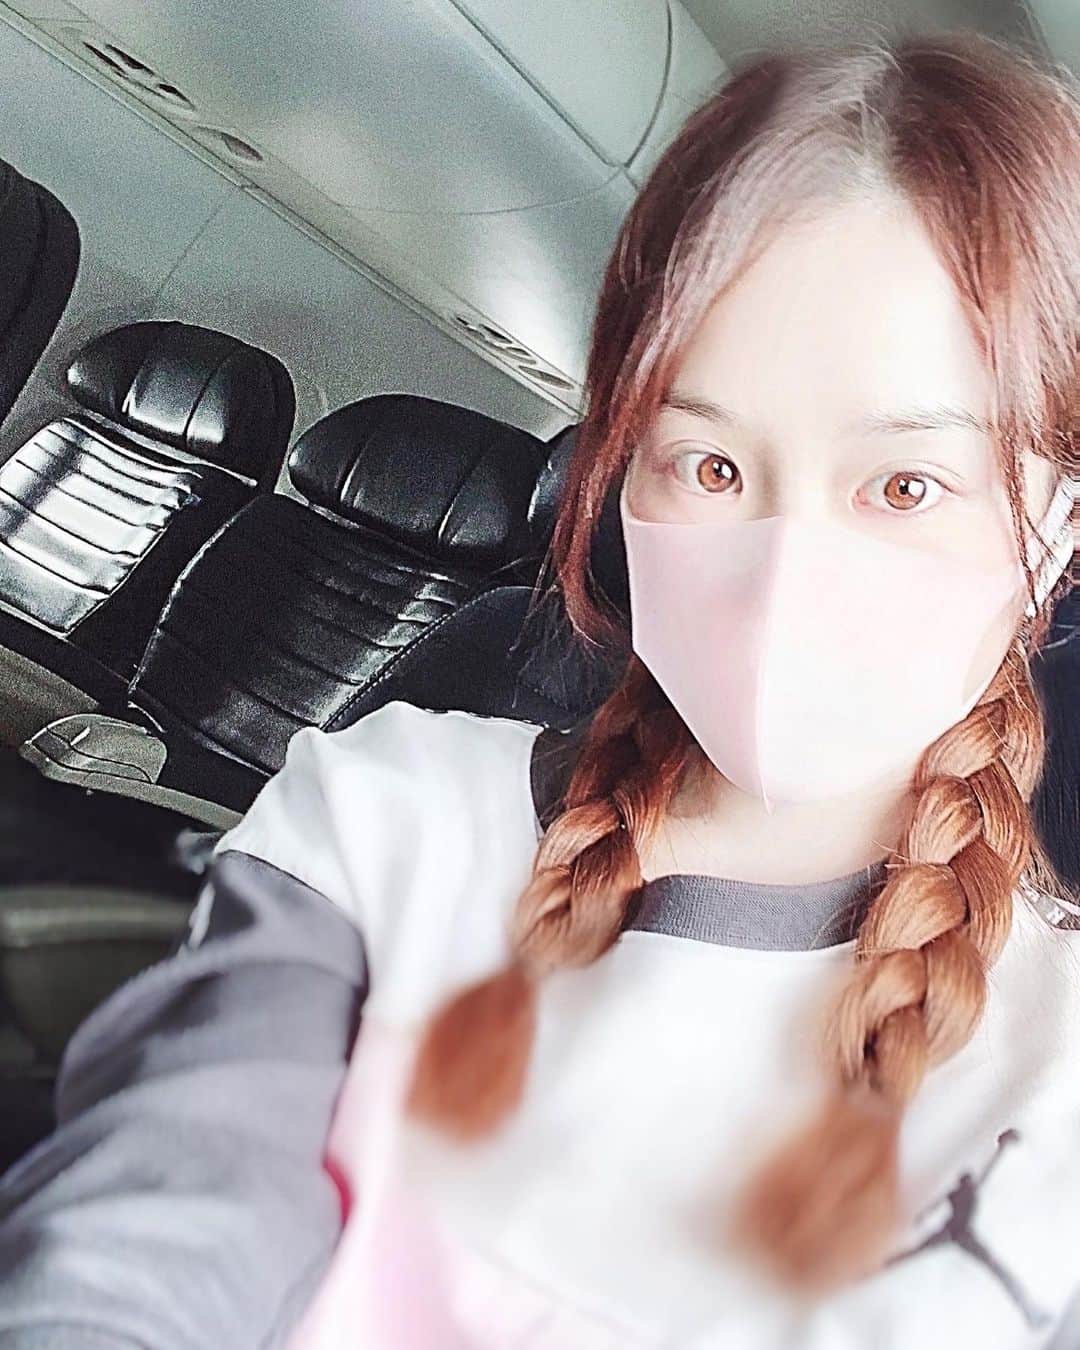 メロディー・モリタさんのインスタグラム写真 - (メロディー・モリタInstagram)「On the plane for the first time in 5 months.✈️ Strict social distancing, masks and take-out only at the airport. * Thank you to my lovely Japanese viewer who kindly gifted me masks! I wore one that perfectly fits my face (and allows me to cover my makeup-free face😂) and put my hair in braids to prevent it from touching different things. * As you can see in the second slide, the flight was quite empty but I felt very safe since precaution/services were top-notch. I wonder how much longer it would take to experience what airports used to be like...😣 Hope you are all having a good week so far!✨  2月以来、5ヶ月ぶりのニューヨークの空港🗽✈️ * ソーシャルディスタンスのサインがあらゆる場所にあり、もちろん全員マスク。カフェなどは閉まっていて、レストランもテイクアウトのみで店内の座席はシャットアウトされていました。 * 日本の視聴者さんに頂いたピッタリしたマスクを付け、髪も色々なところに触れない様に＆手で触らない様に三つ編みに💡 * いつも満席だったフライトは、2枚目の動画の状態👀🎥 * 席に座る前には除菌シートも頂き、感染予防は空港でも機内でも完璧にされていて不安はありませんでした。 * でも私はやっぱり、以前の様な活気あるワクワク感のあるニューヨークの空港が好き。またあの雰囲気を味わえるのはいつなのでしょうか...(><)」8月5日 5時28分 - melodeemorita